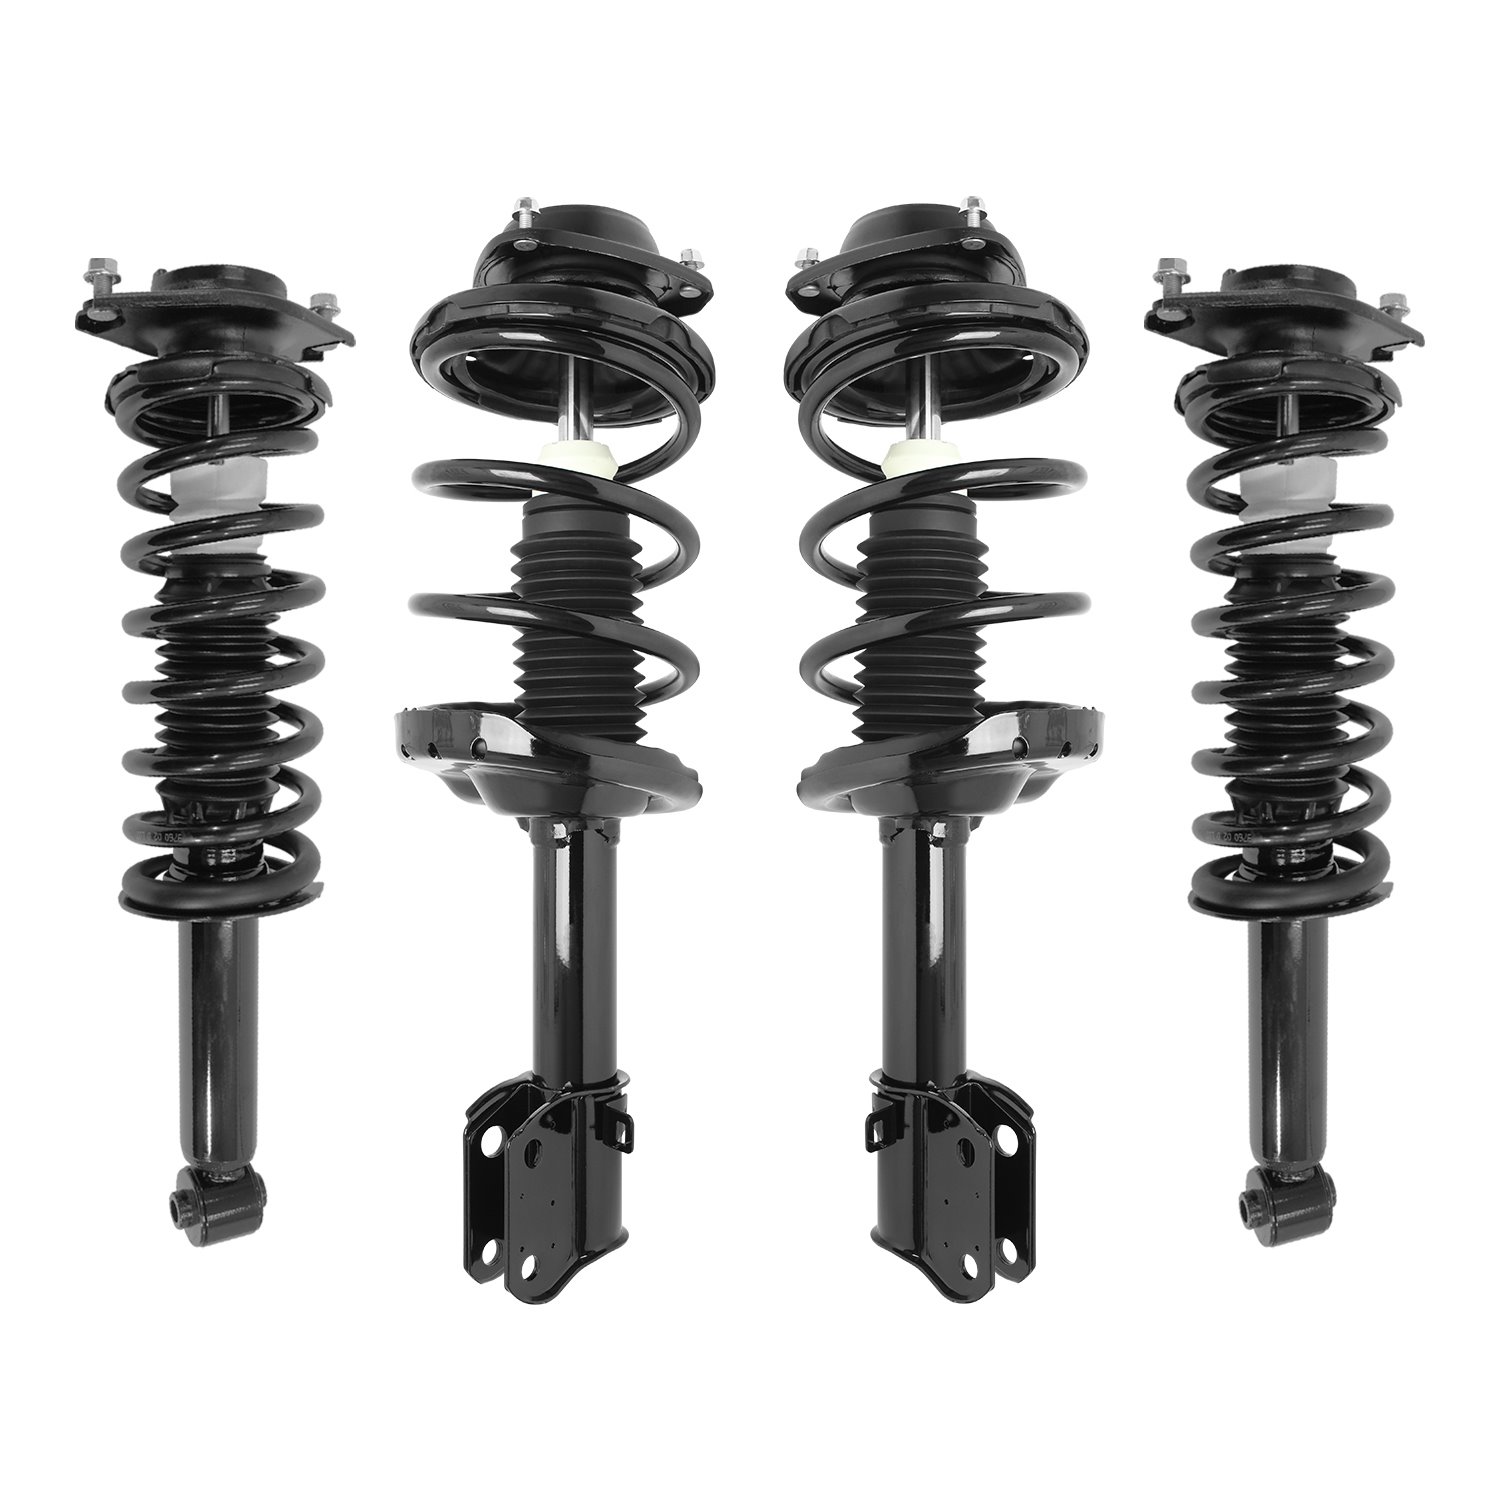 4-11915-15900-001 Front & Rear Suspension Strut & Coil Spring Assembly Kit Fits Select Subaru Outback